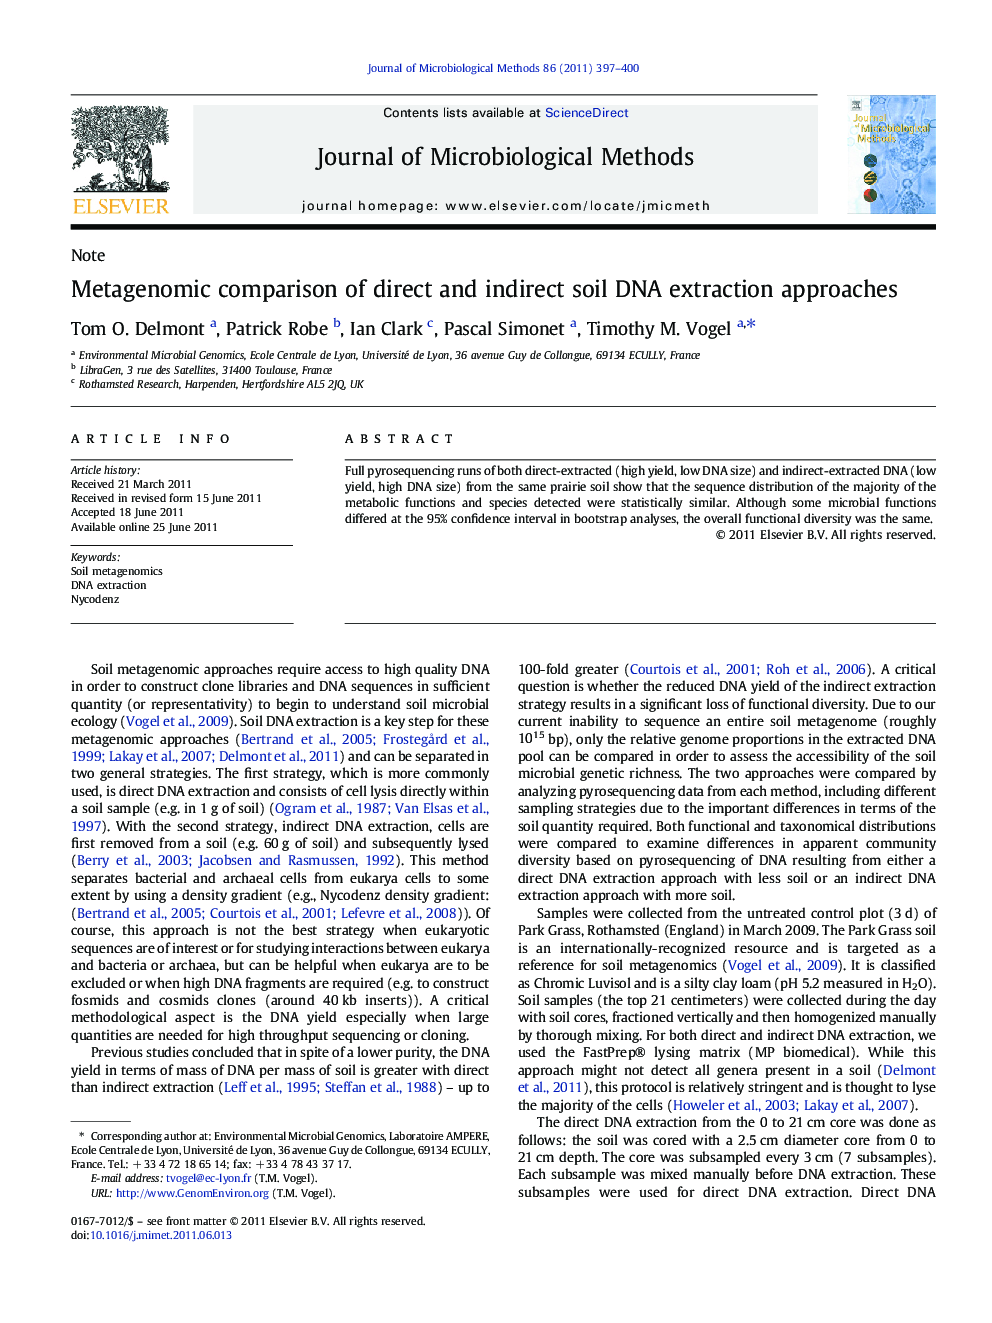 Metagenomic comparison of direct and indirect soil DNA extraction approaches